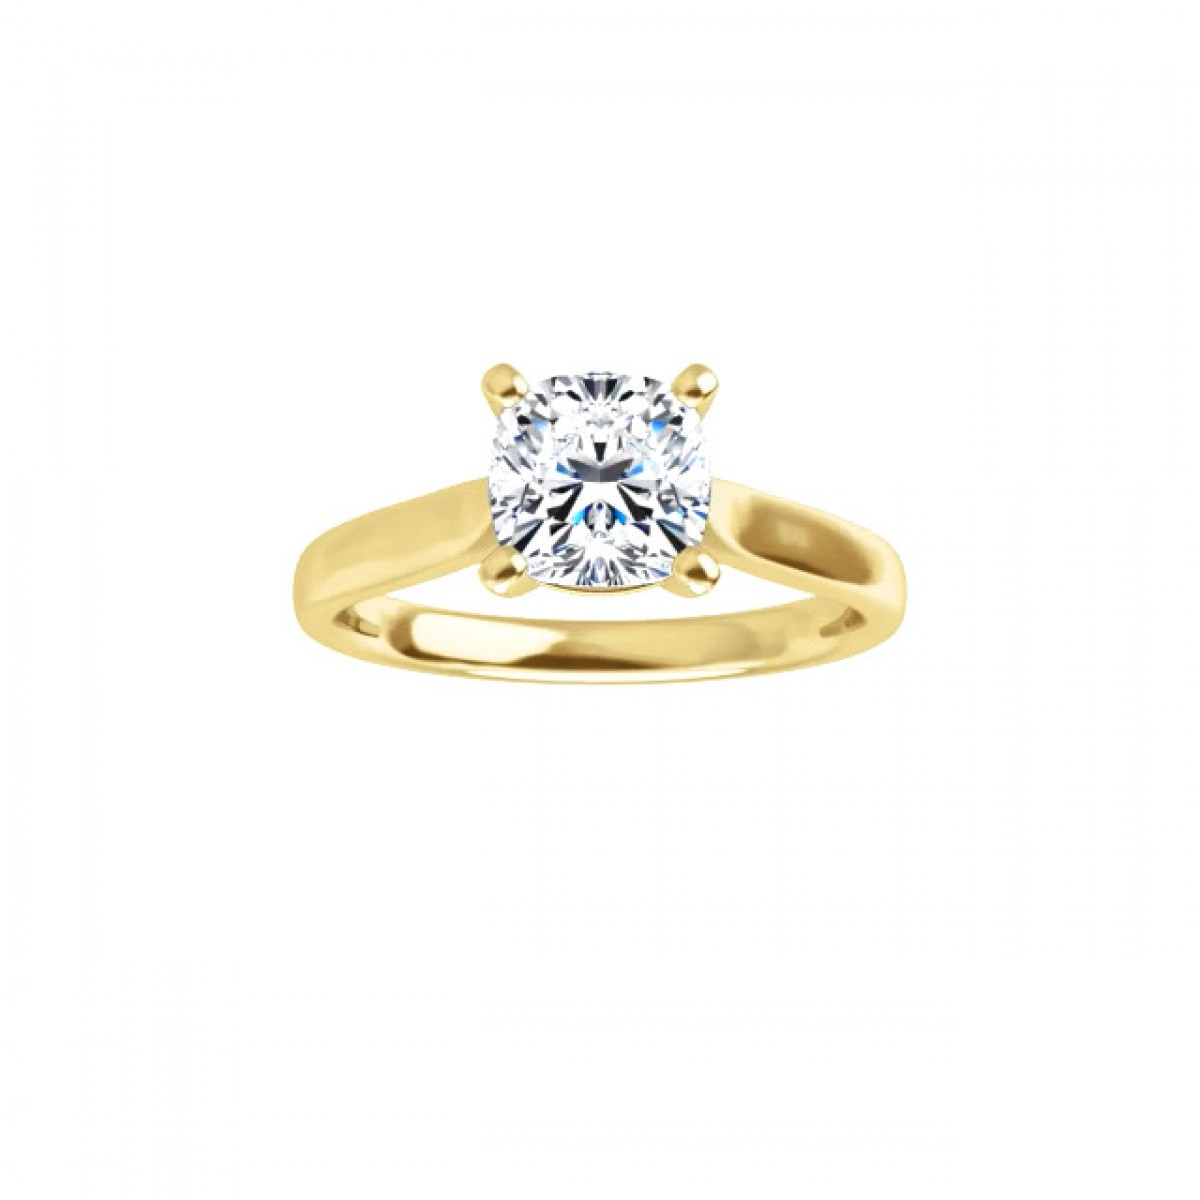 1.85 Carat Solid 14KT Yellow Gold Cushion Shape Solitaire Engagement Ring 